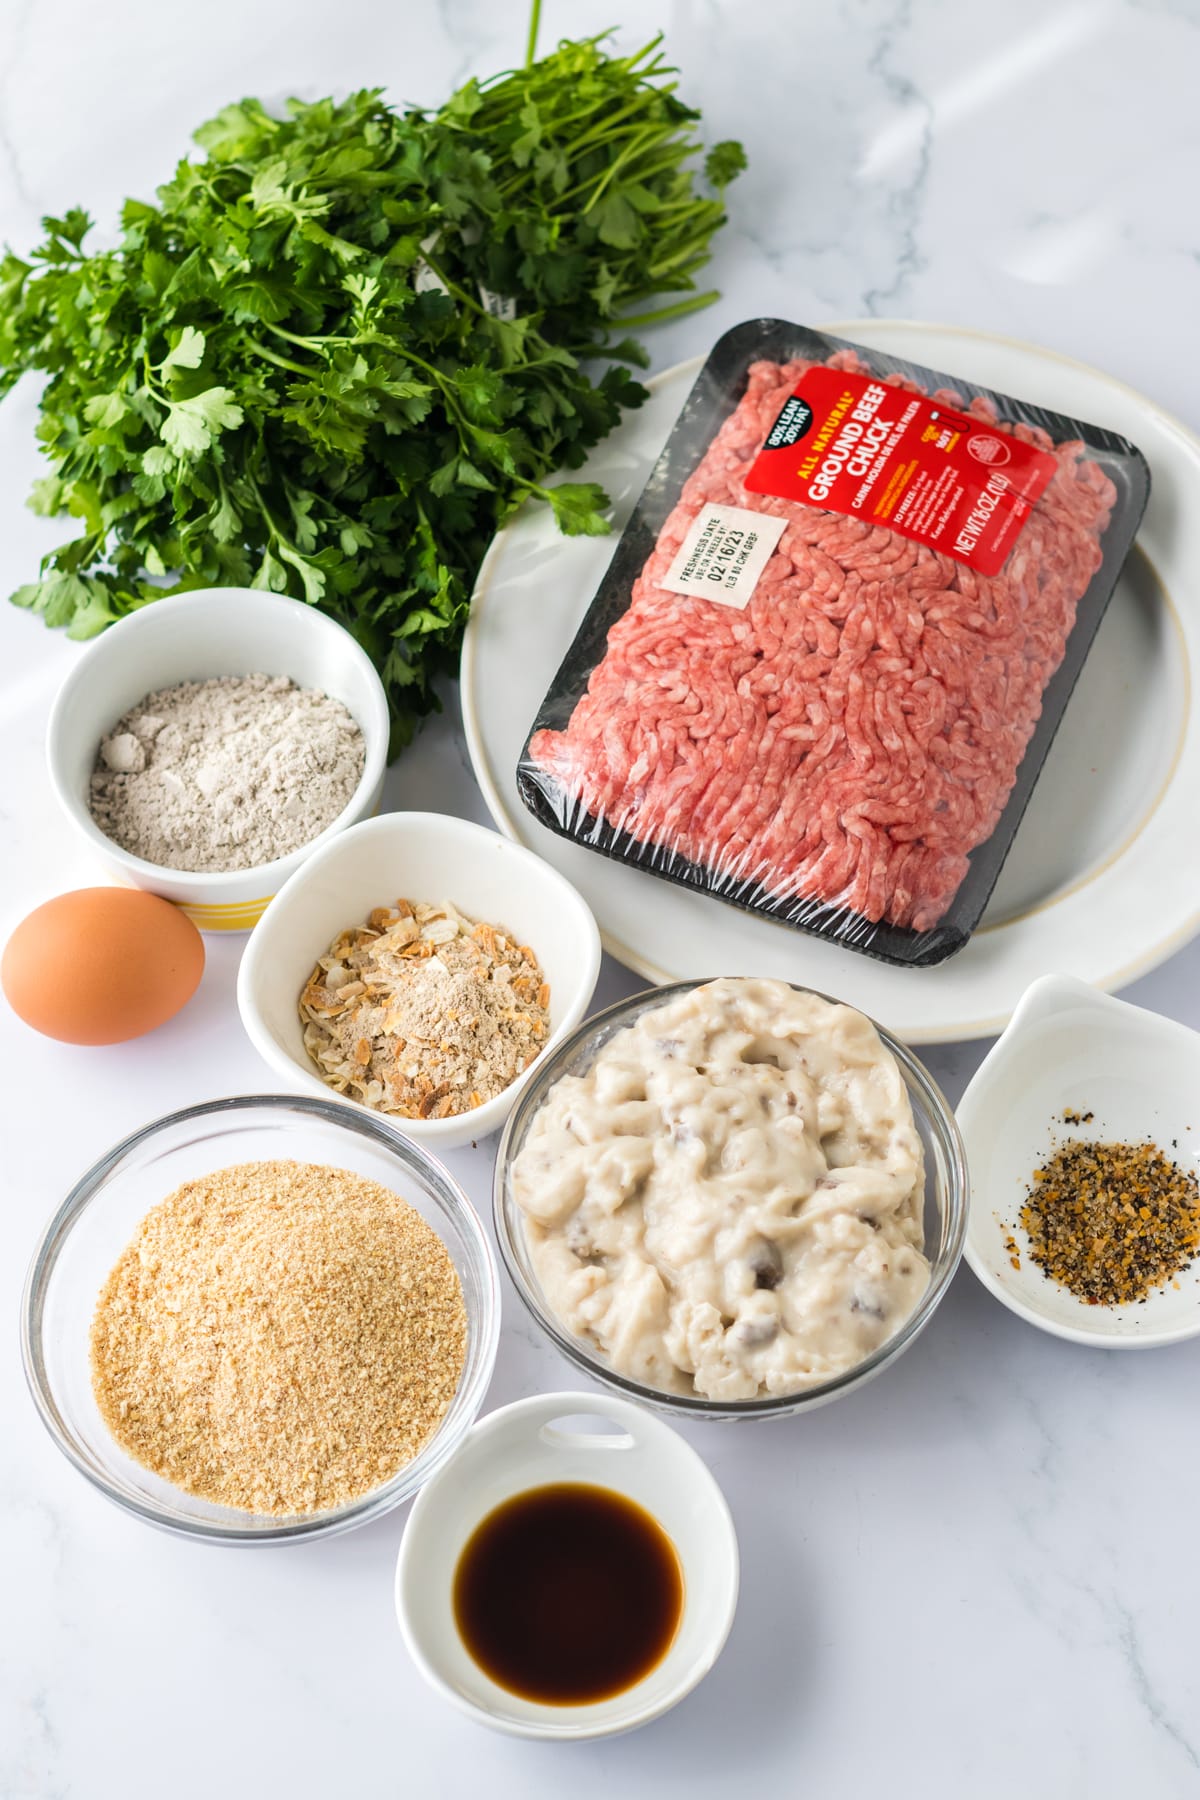 Ingredients for Slow Cooker Smothered Hamburgers include lean ground beef, dry onion soup mix, worcestershire sauce, steak seasoning, egg, bread crumbs, cream of mushroom soup, water, brown gravy mix and parsley for garnish, optional